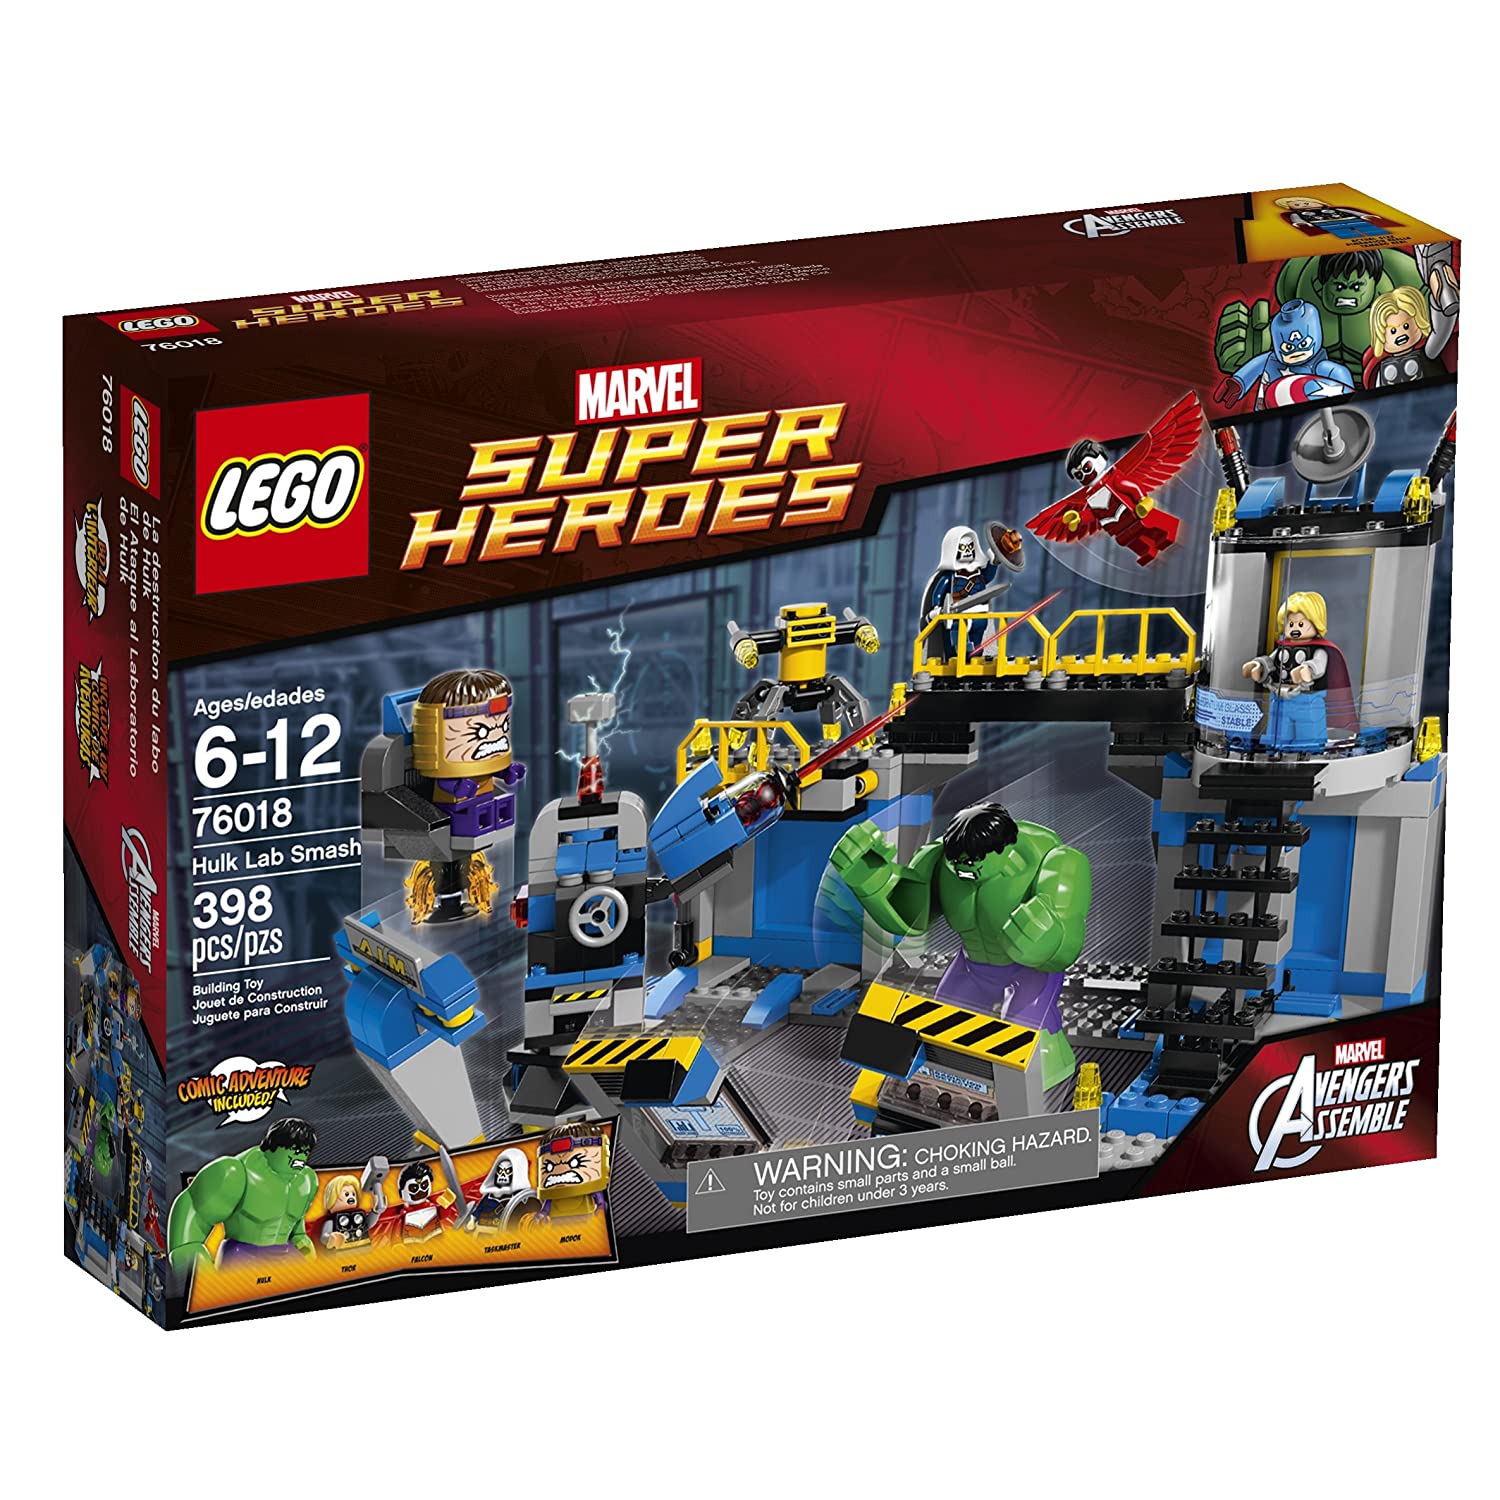 Top 9 Best LEGO Hulk Sets Reviews in 2022 2